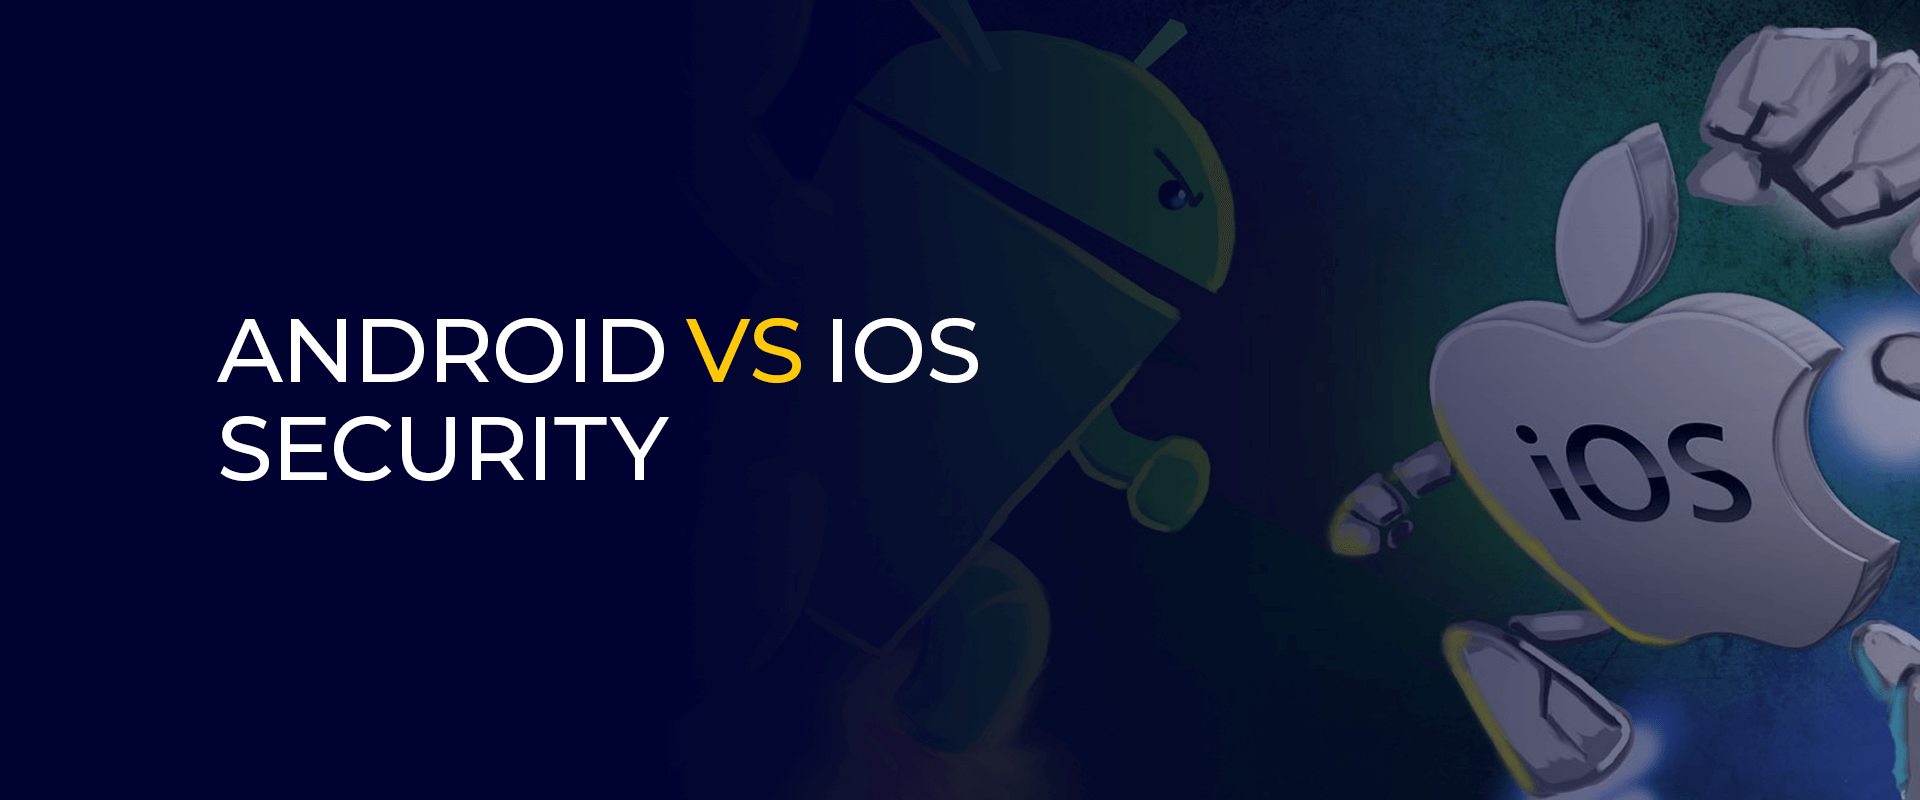 Android vs iOS Security